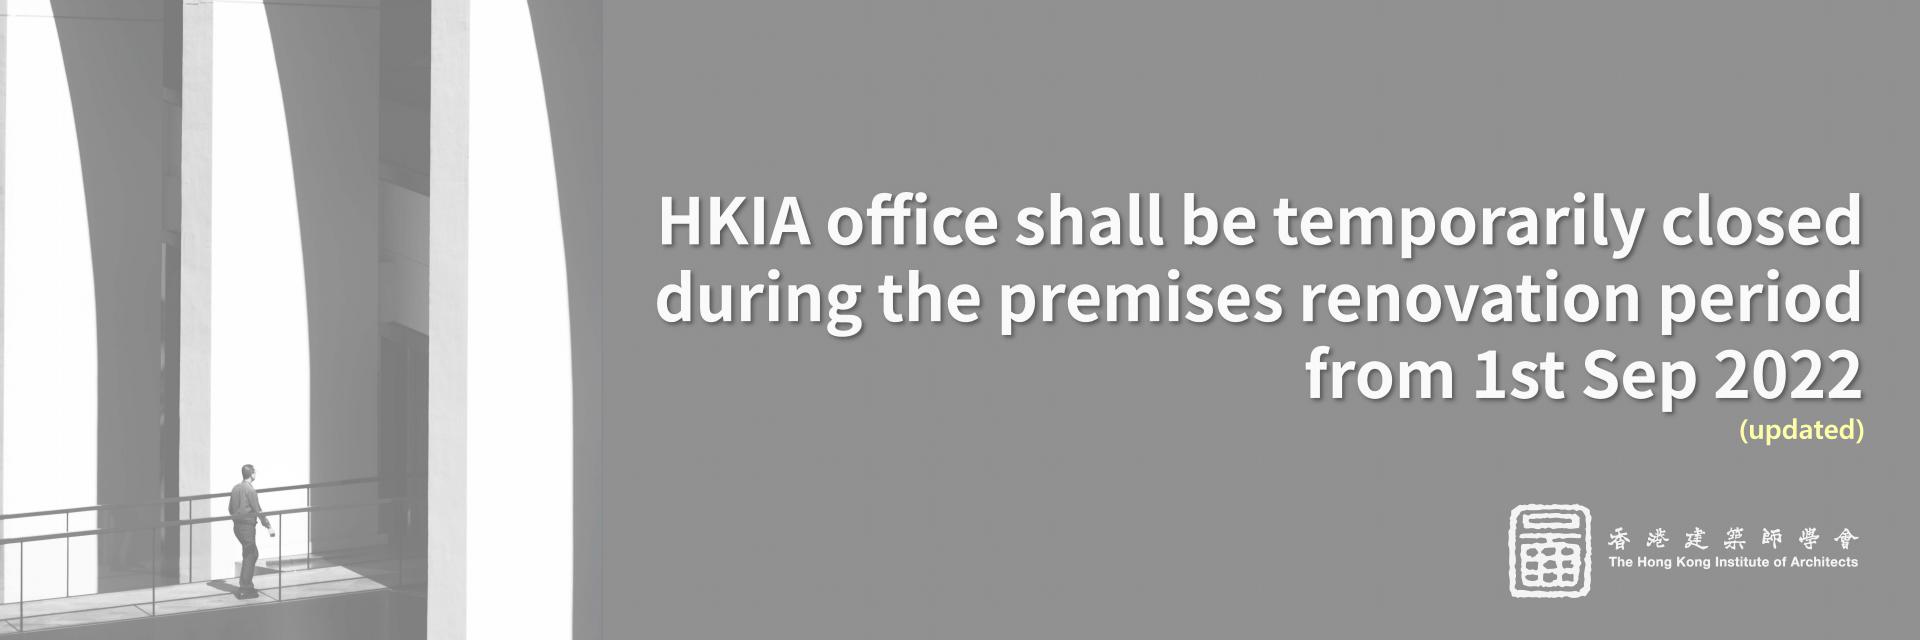 HKIA office shall be temporary closed during the premises renovation period from 1 Sep 2022